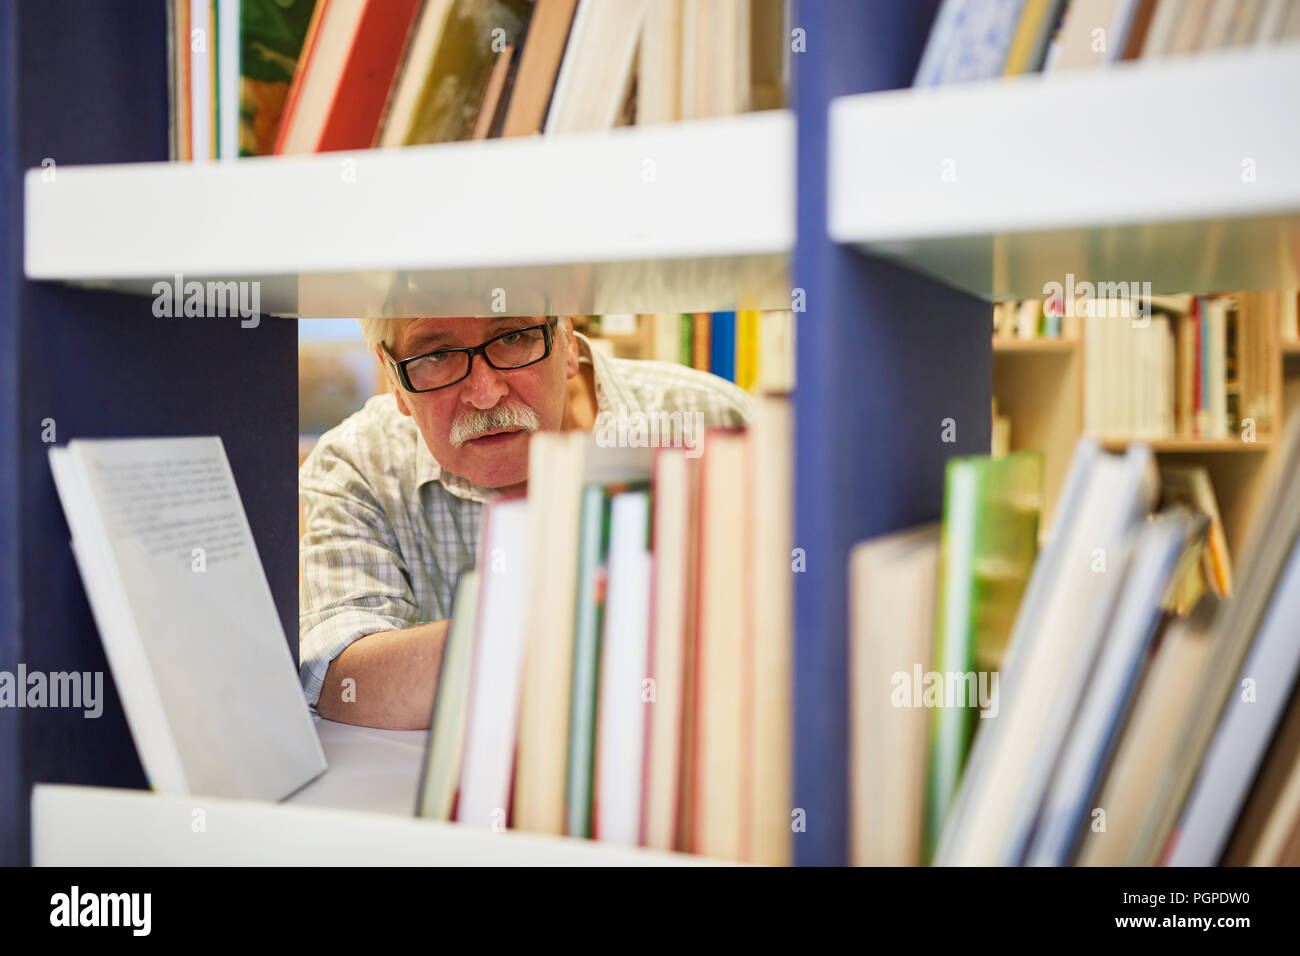 Senior as a scientist researching in a library with many books Stock Photo